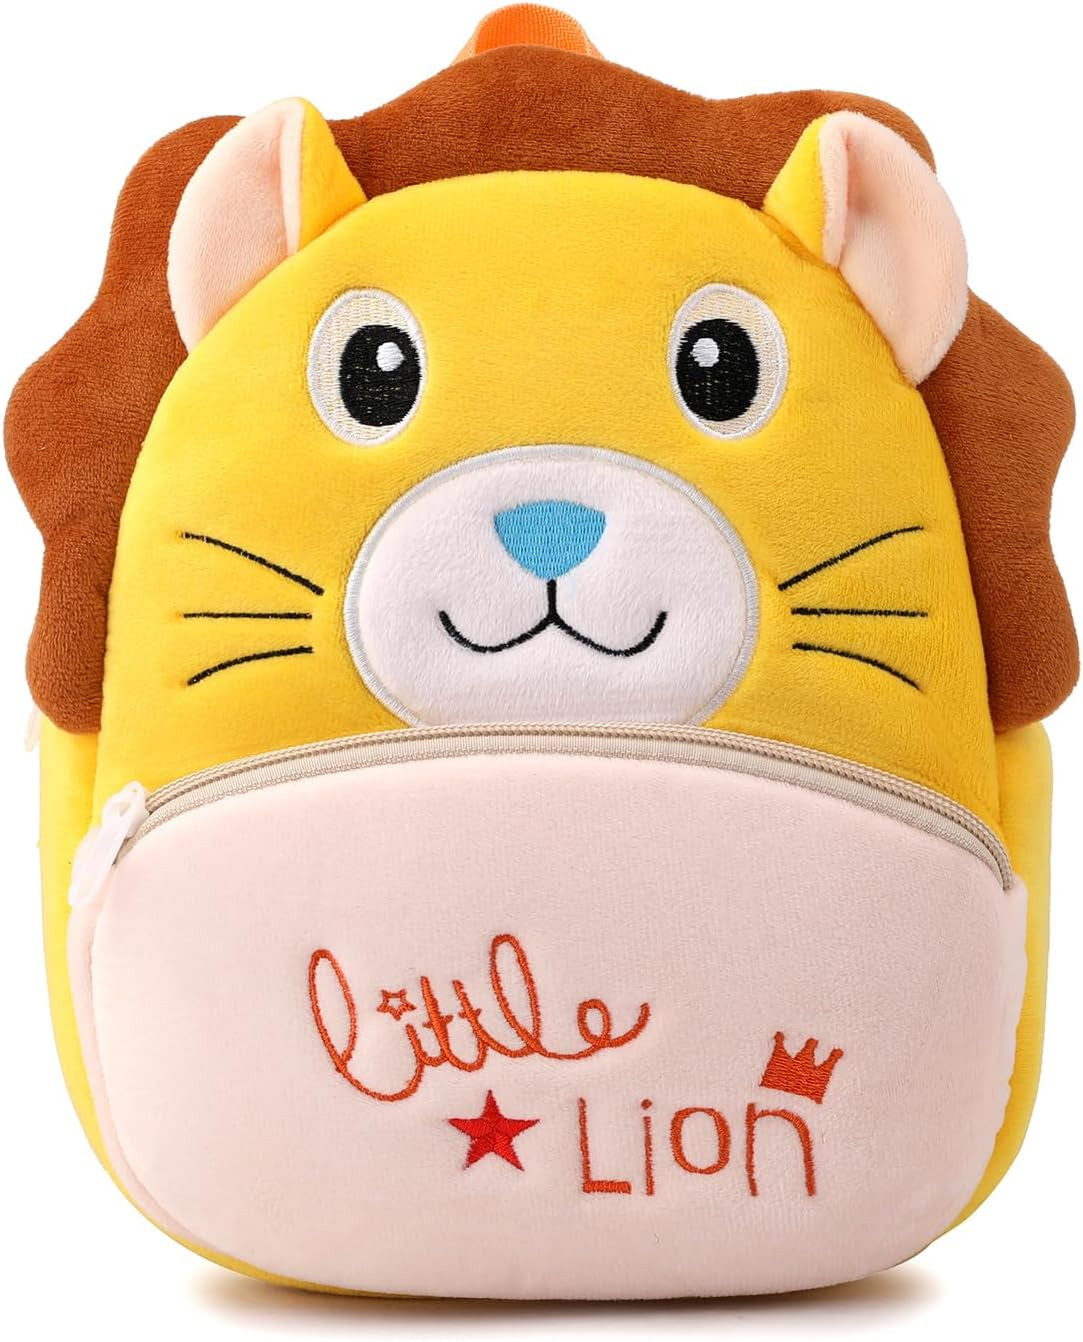 Toddler Backpack for Boys and Girls, Cute Soft Plush Animal Cartoon Mini Backpack Little for Kids 2-6 Years (Lion-H)